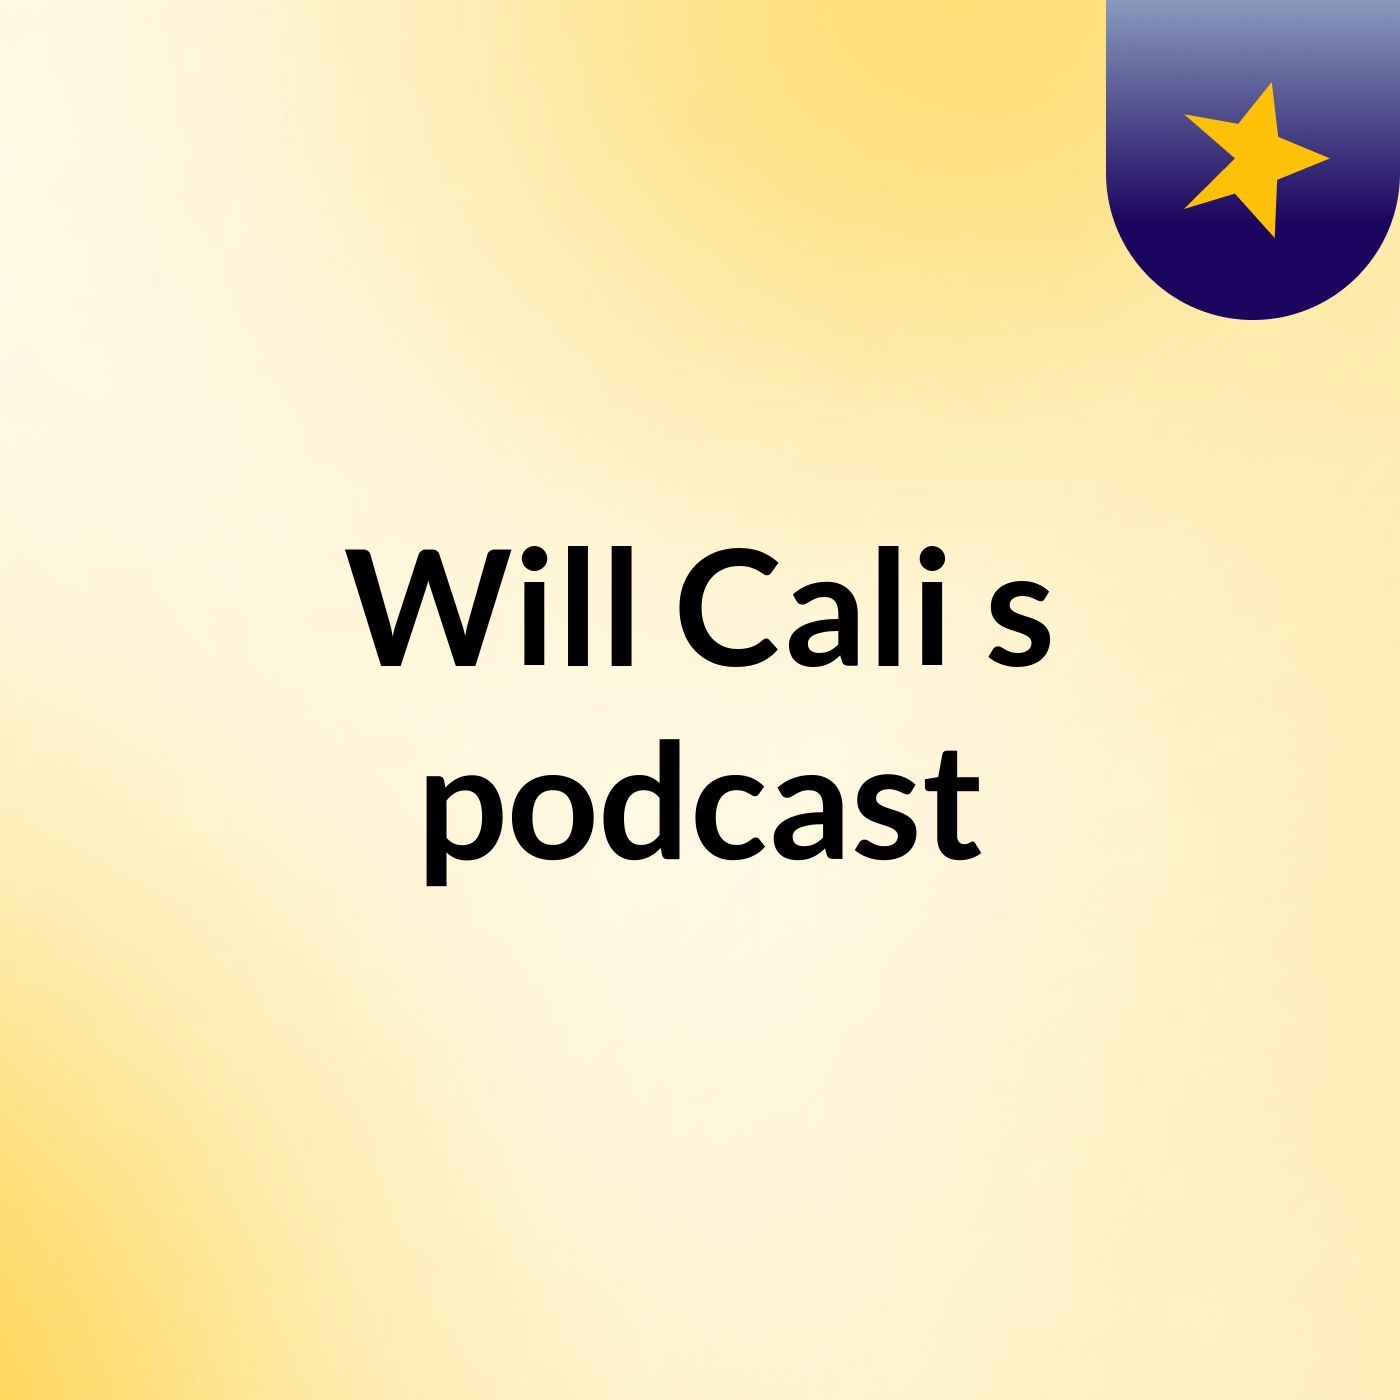 Episode 2 - Will Cali's podcast